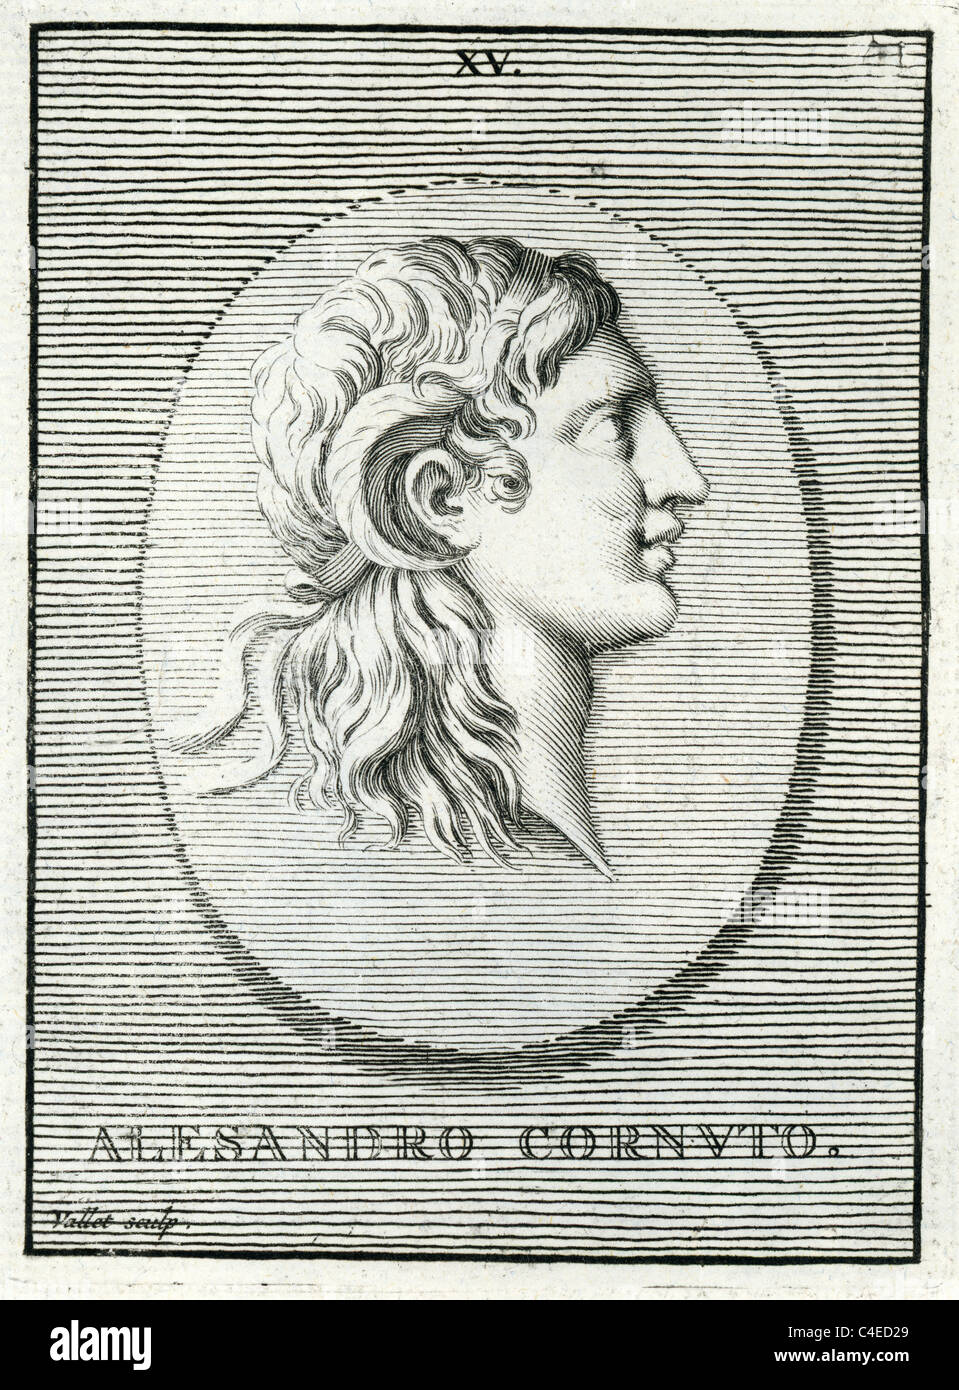 Classical portrait of Alexander the Great. Alexander III of Macedon (356 to 323 BC), commonly known as Alexander the Great, Stock Photo